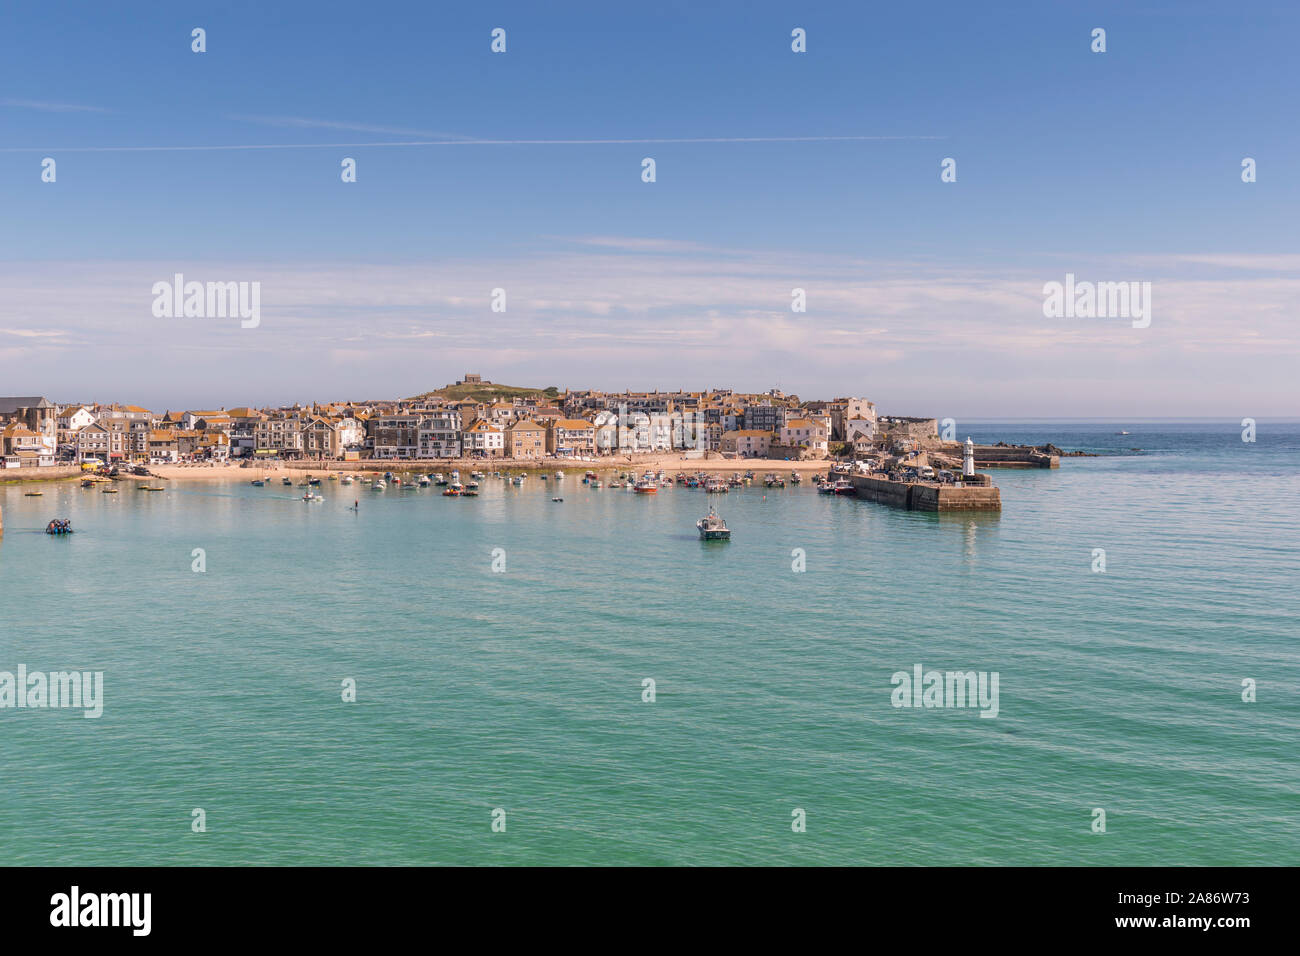 Summer in the popular seaside resort of St Ives, Cornwall. Stock Photo